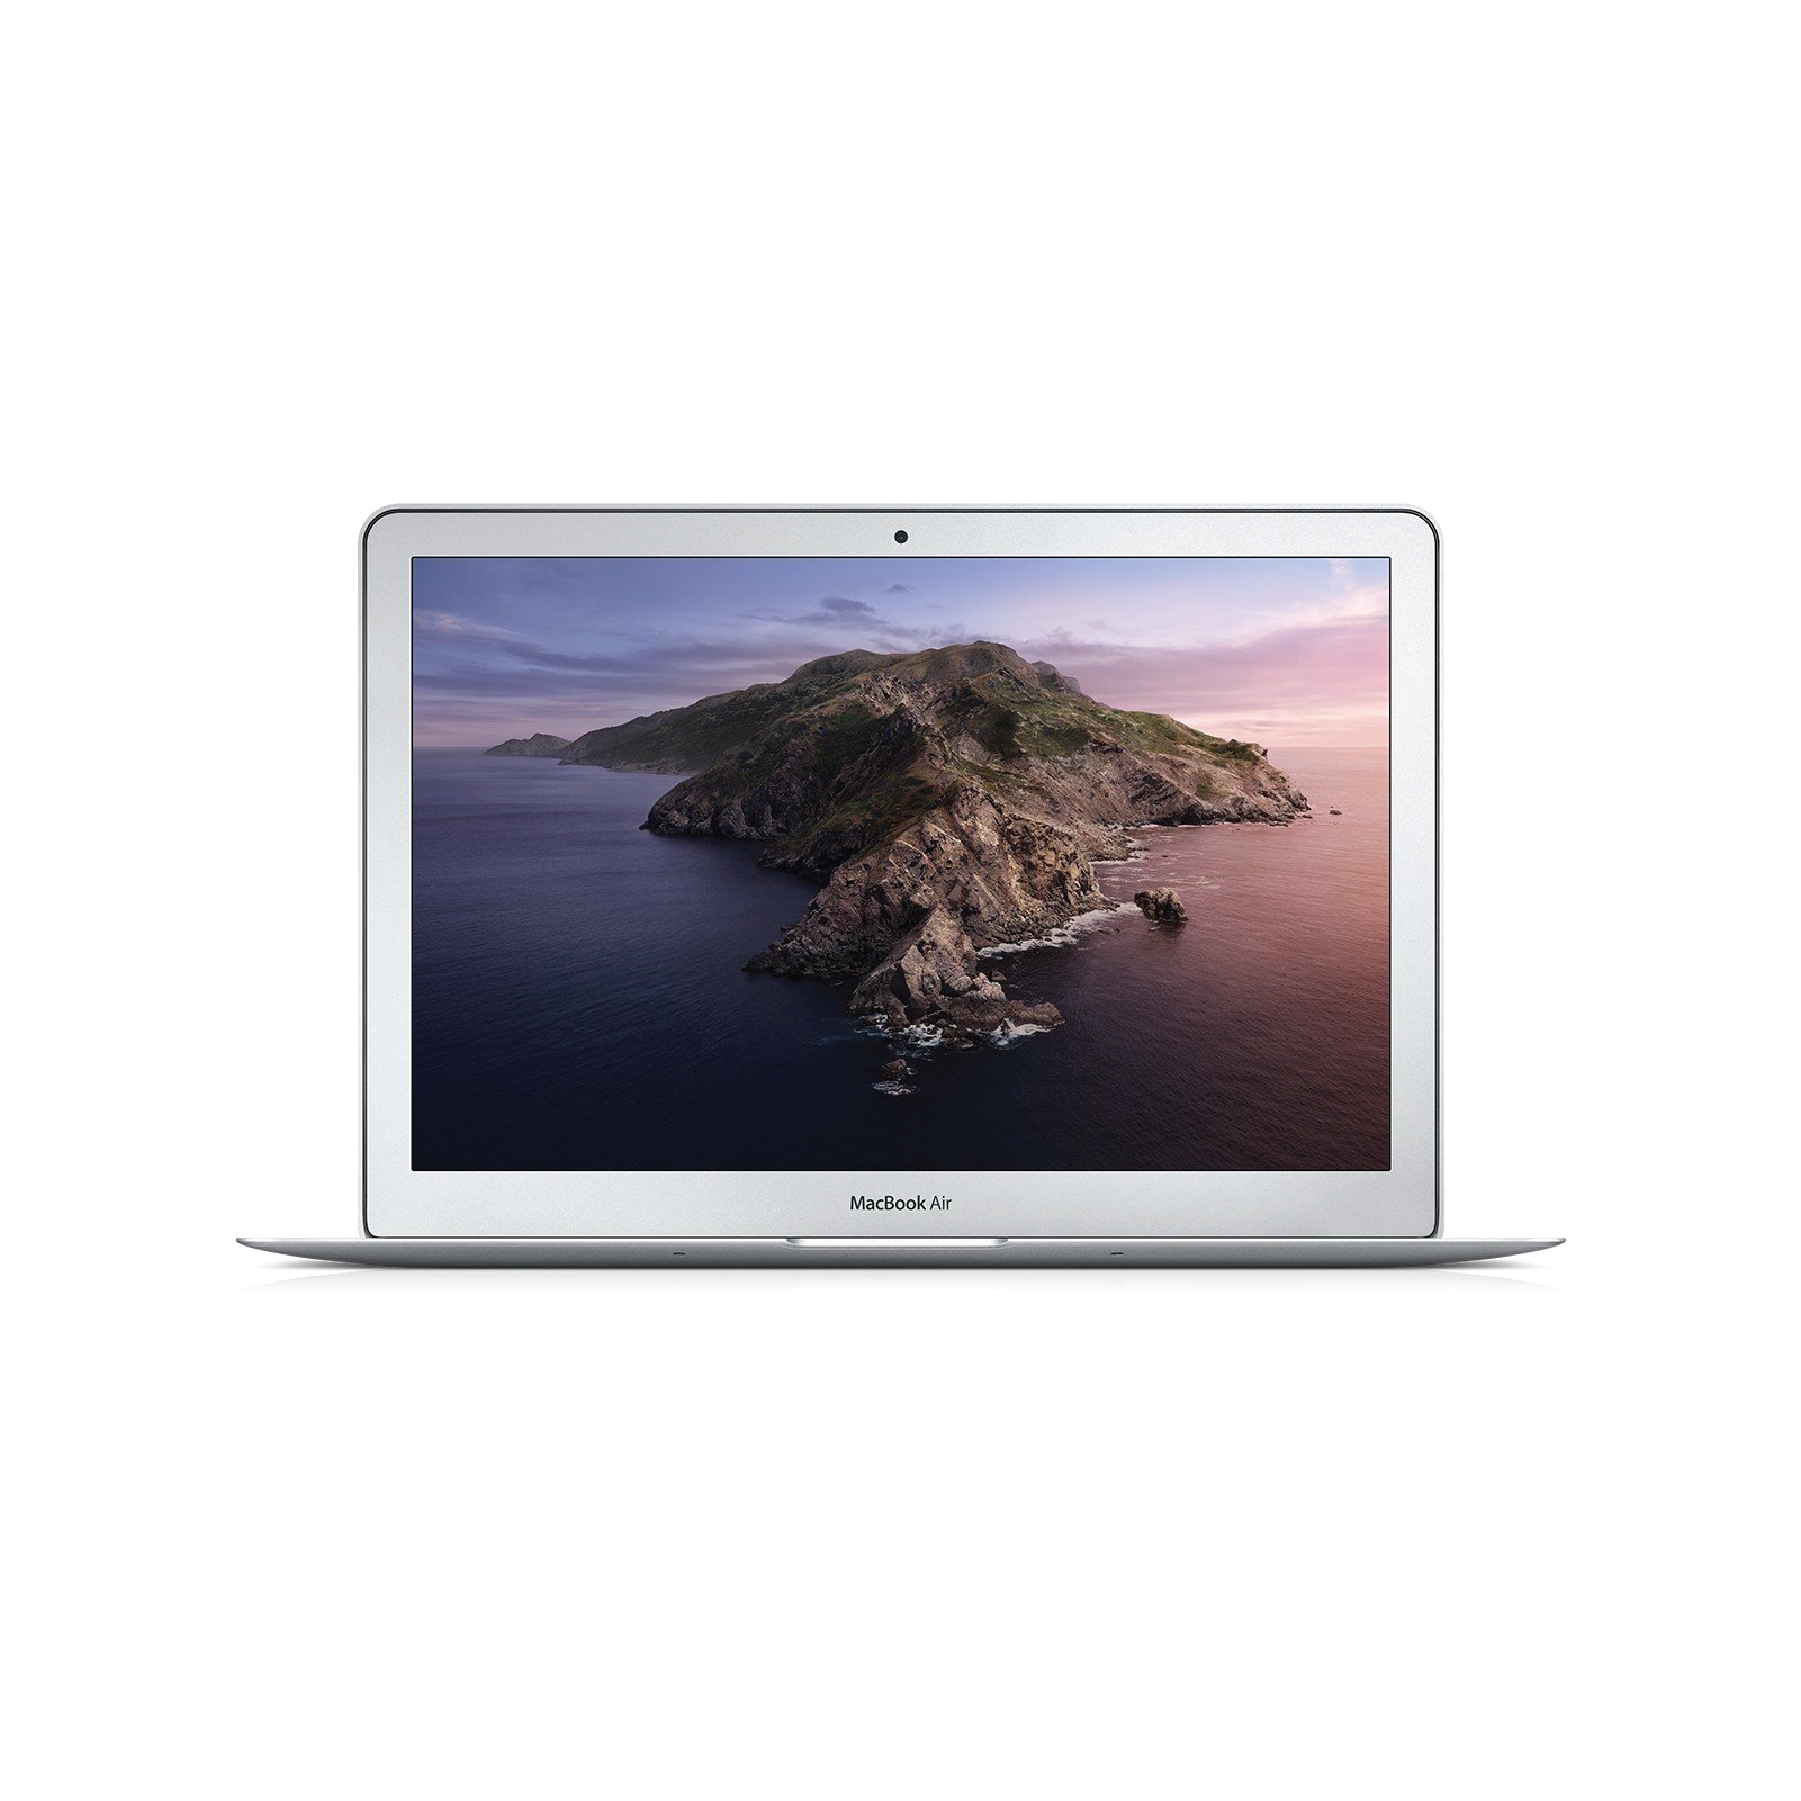 MacBook Air (13-inch, 2017) 1.8GHz, Intel Core i5 128GB - Silver (Best) - iStore Pre-owned